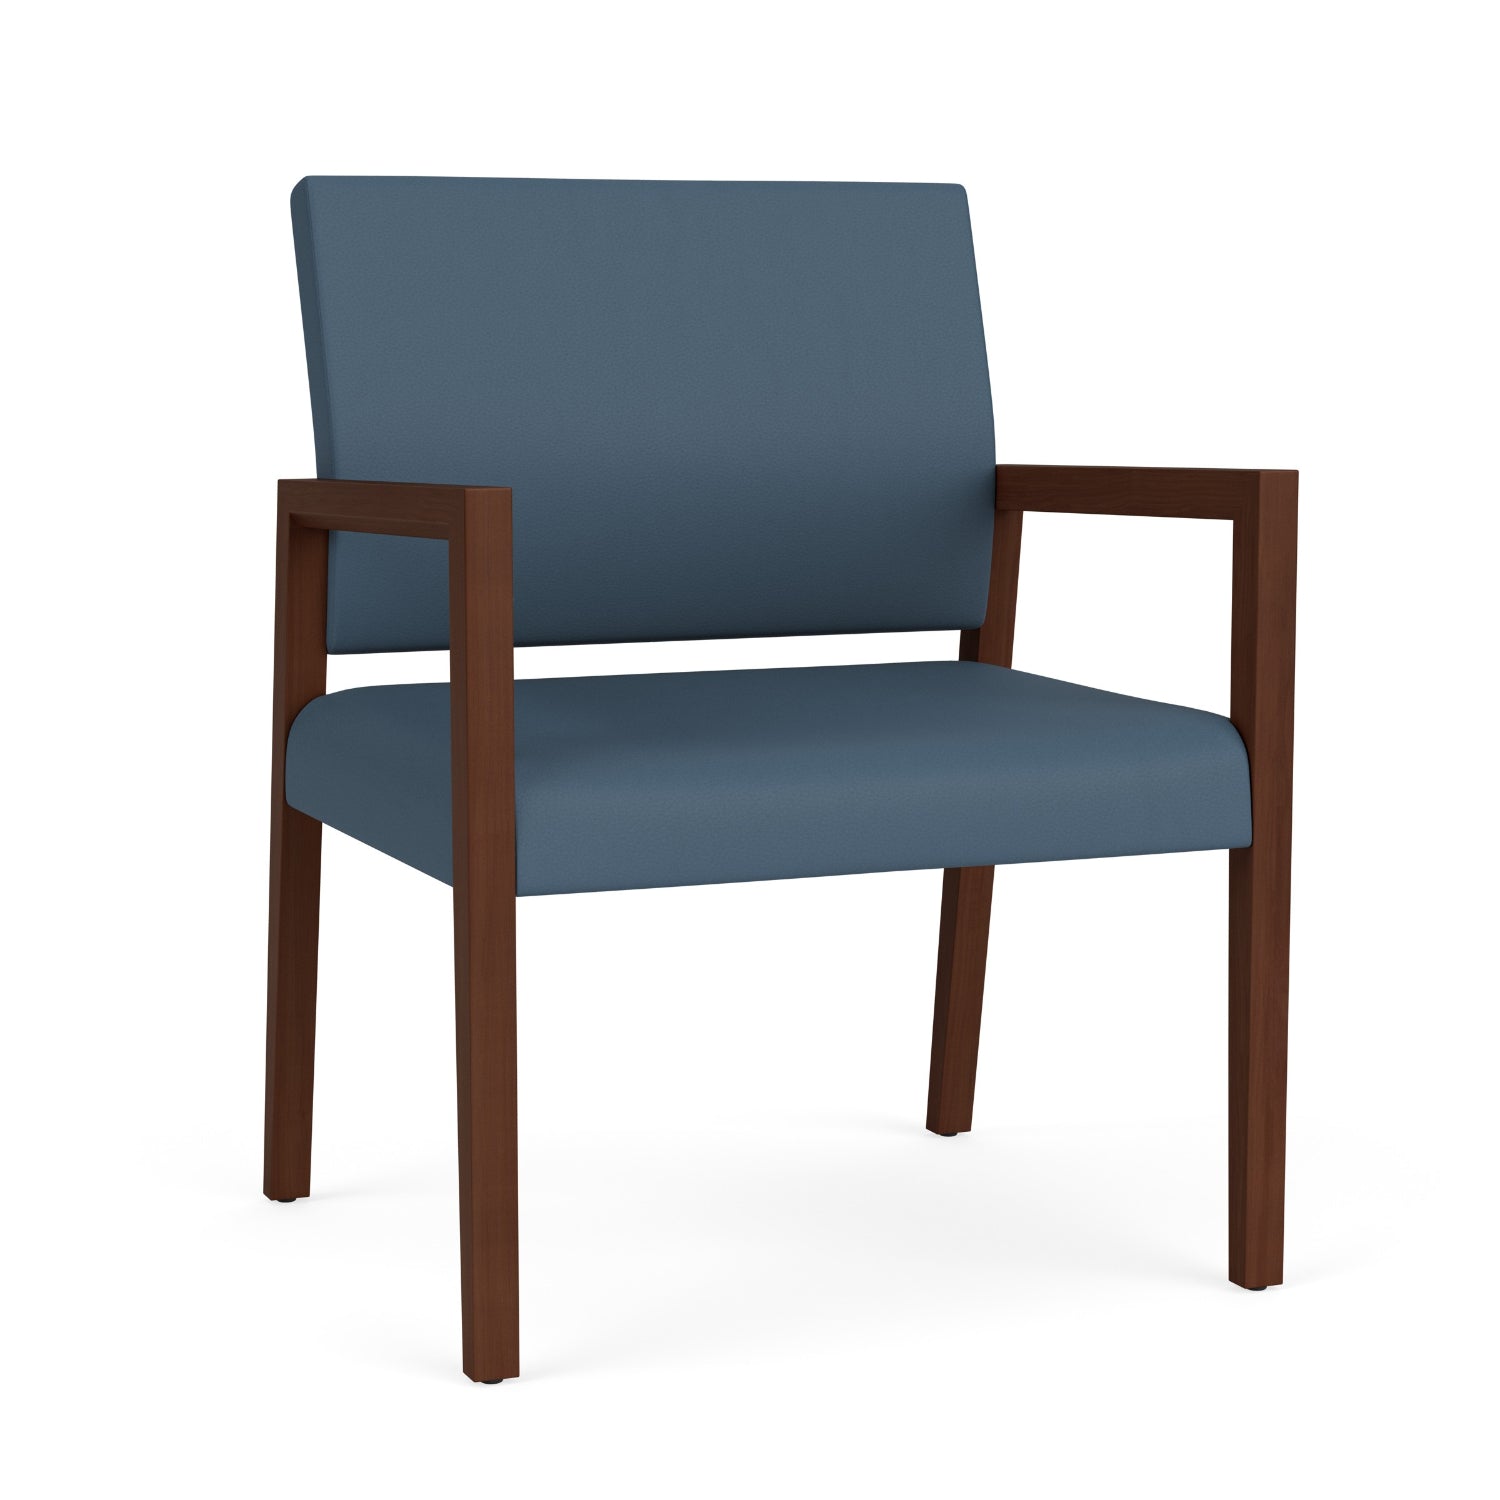 Brooklyn Collection Reception Seating, Oversize Guest Chair, 400 lb Capacity, Standard Vinyl Upholstery, FREE SHIPPING